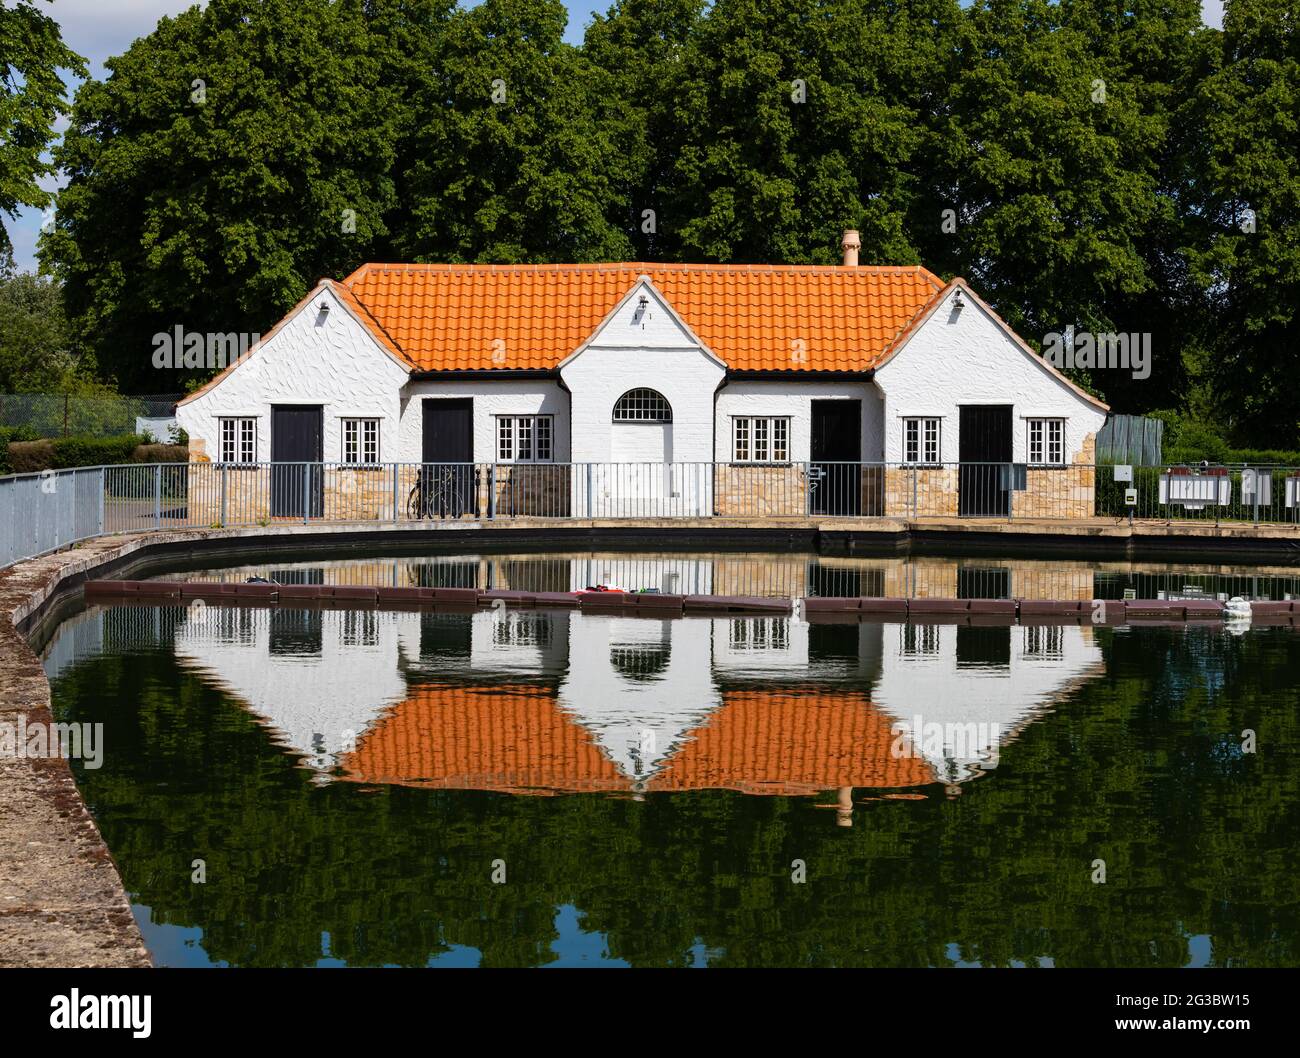 The old swimming pool changing rooms and model boating lake. Wyndham Park, Grantham, Lincolnshire, England Stock Photo